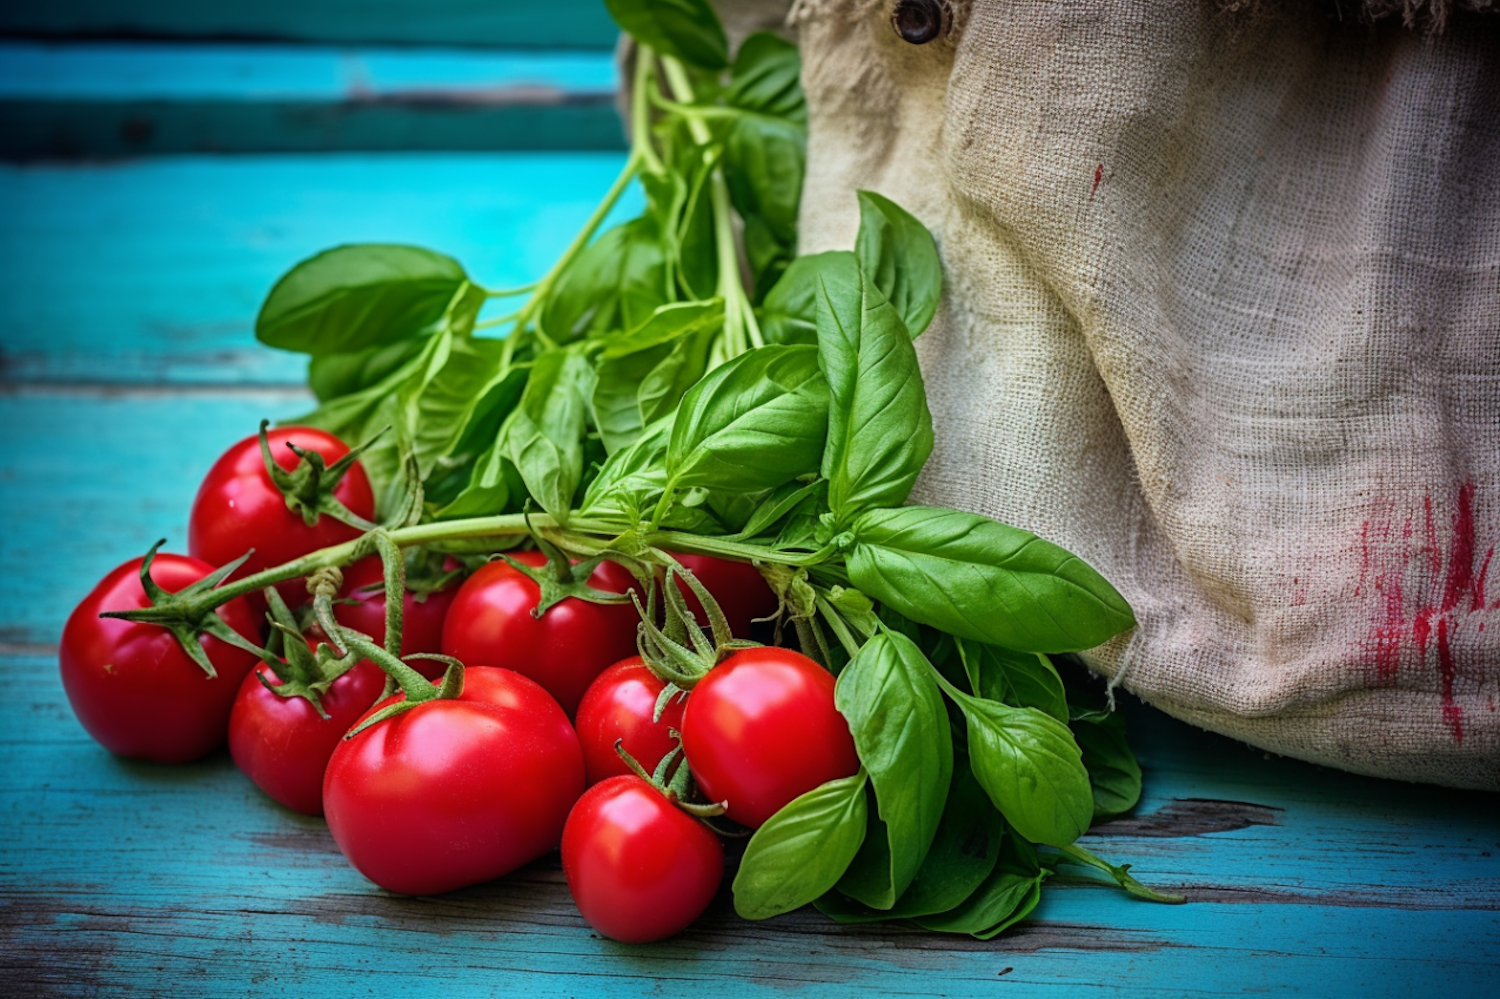 Fresh Tomatoes and Basil on Rustic Teal Backdrop